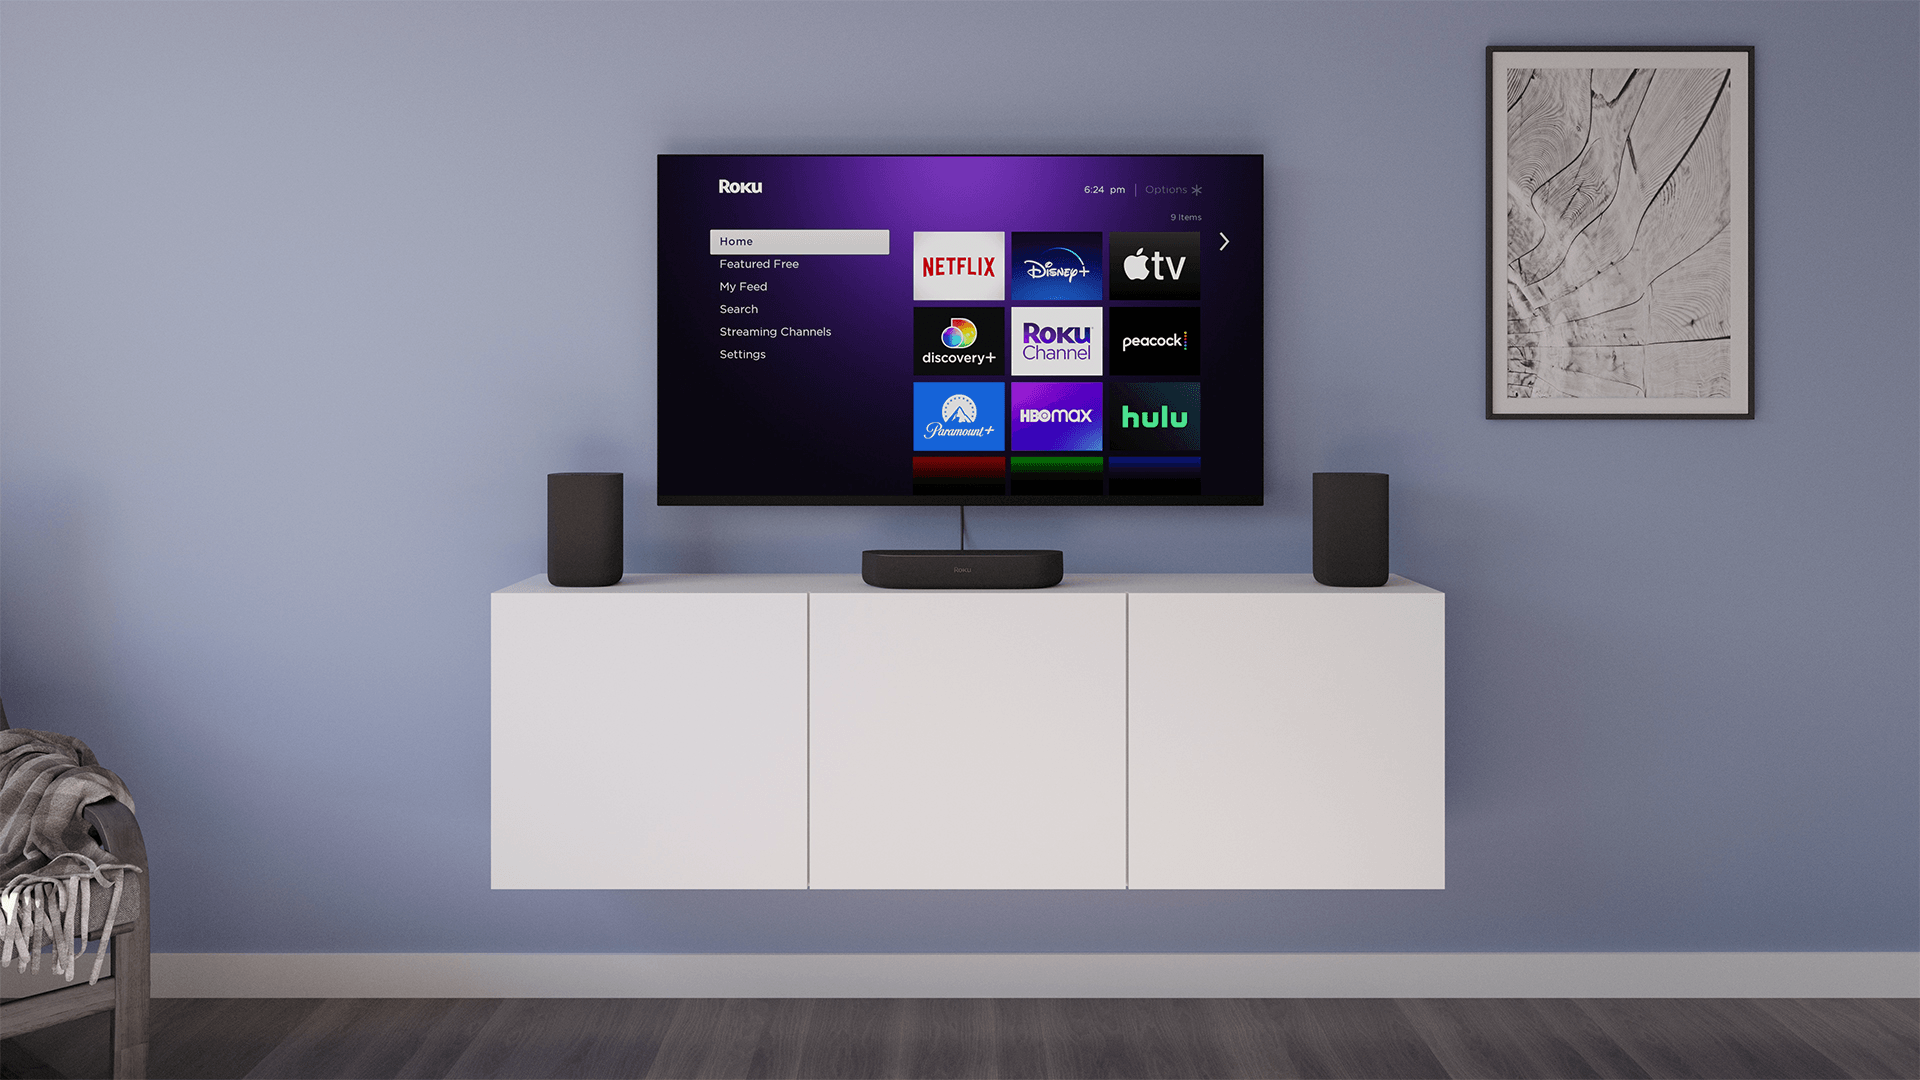 YouTube Could Be Dropped from Roku Before the End of the Year